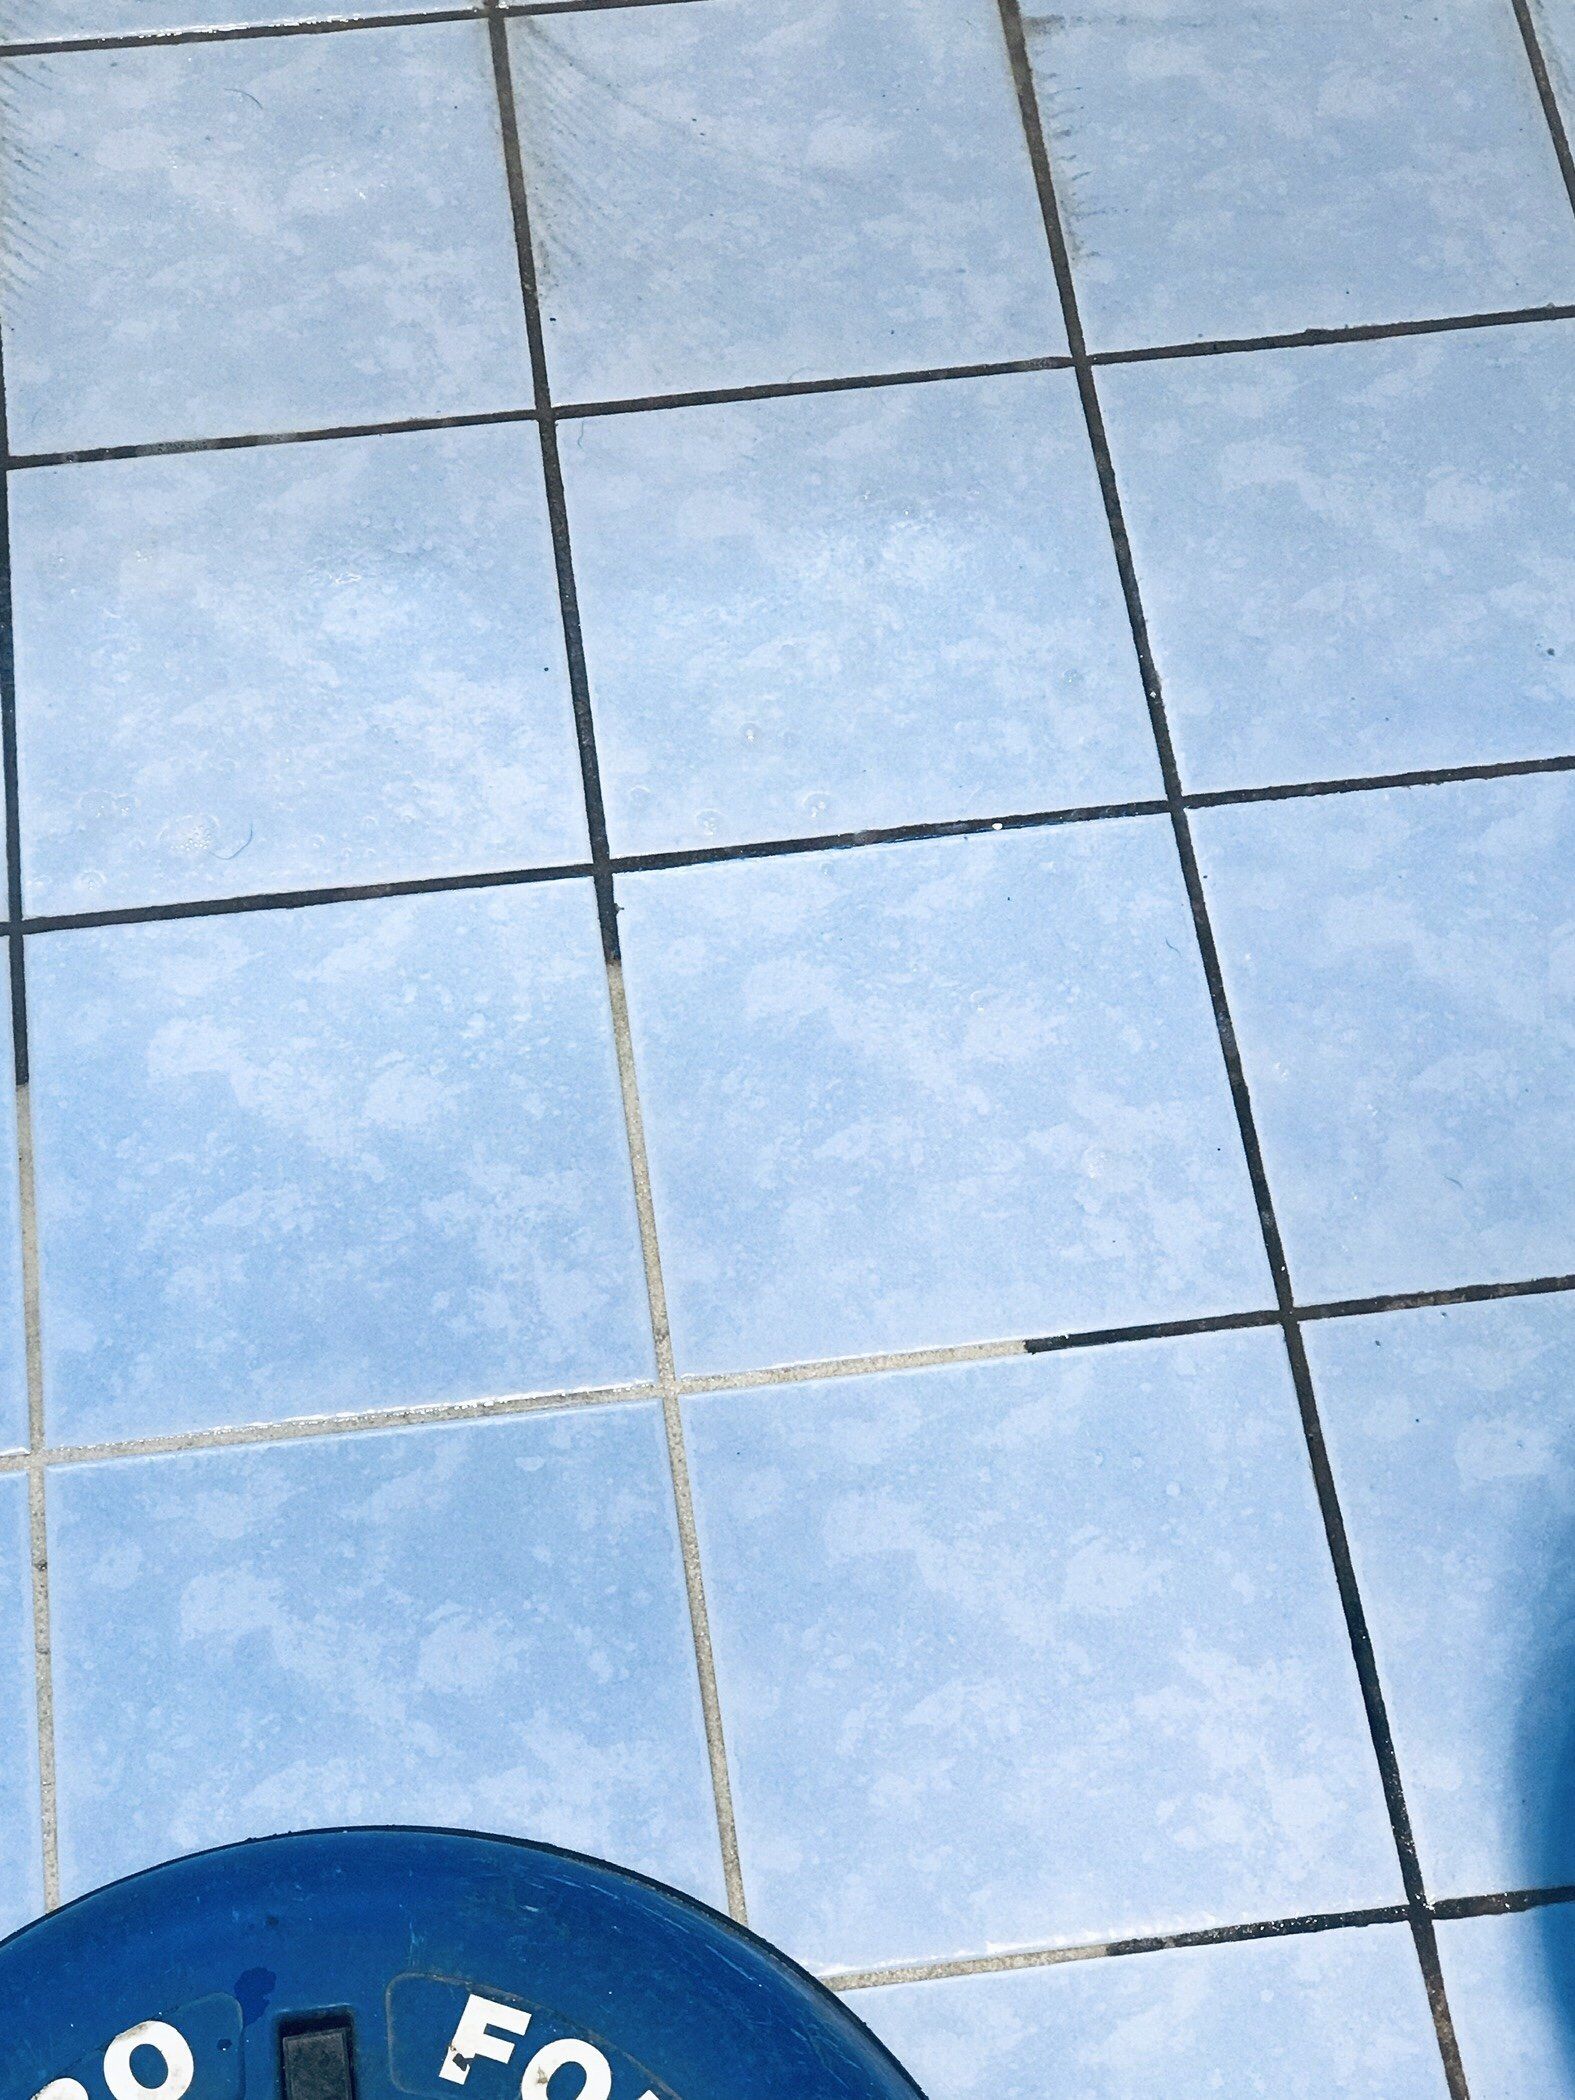 Tile Grout Cleaning - Shellharbour, NSW